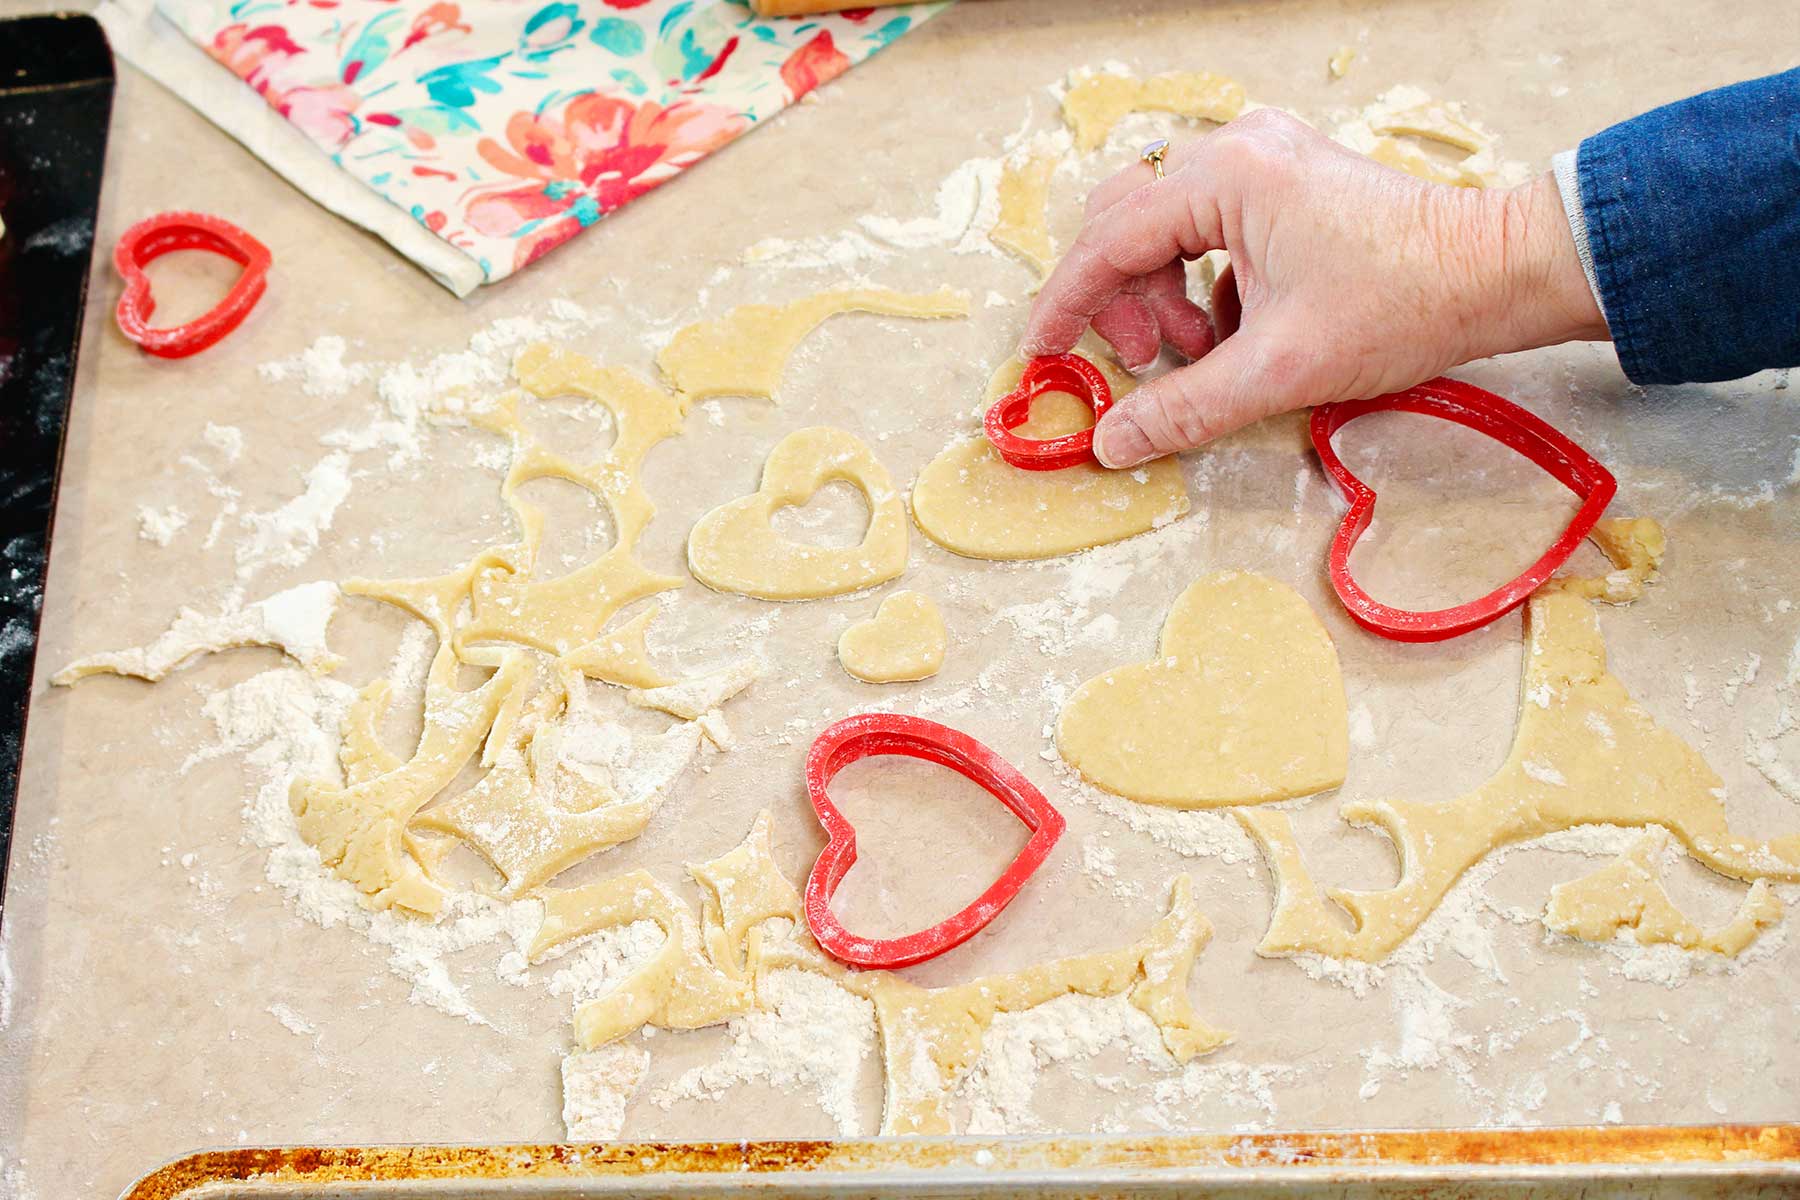 Hand pressing red heart shaped cookie cutter into dough.